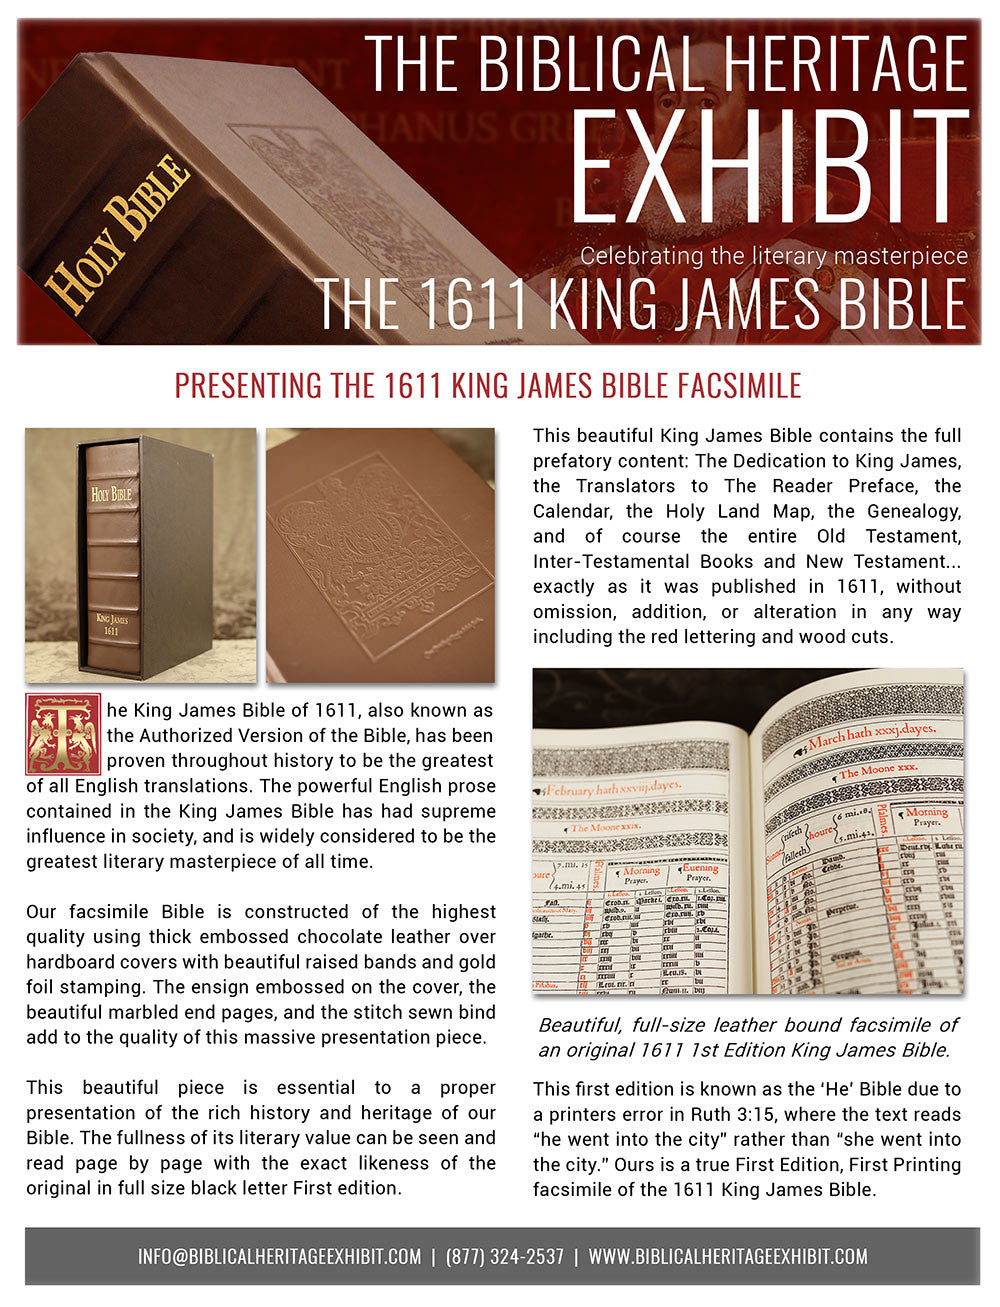 King James Bible - newsletter page 1